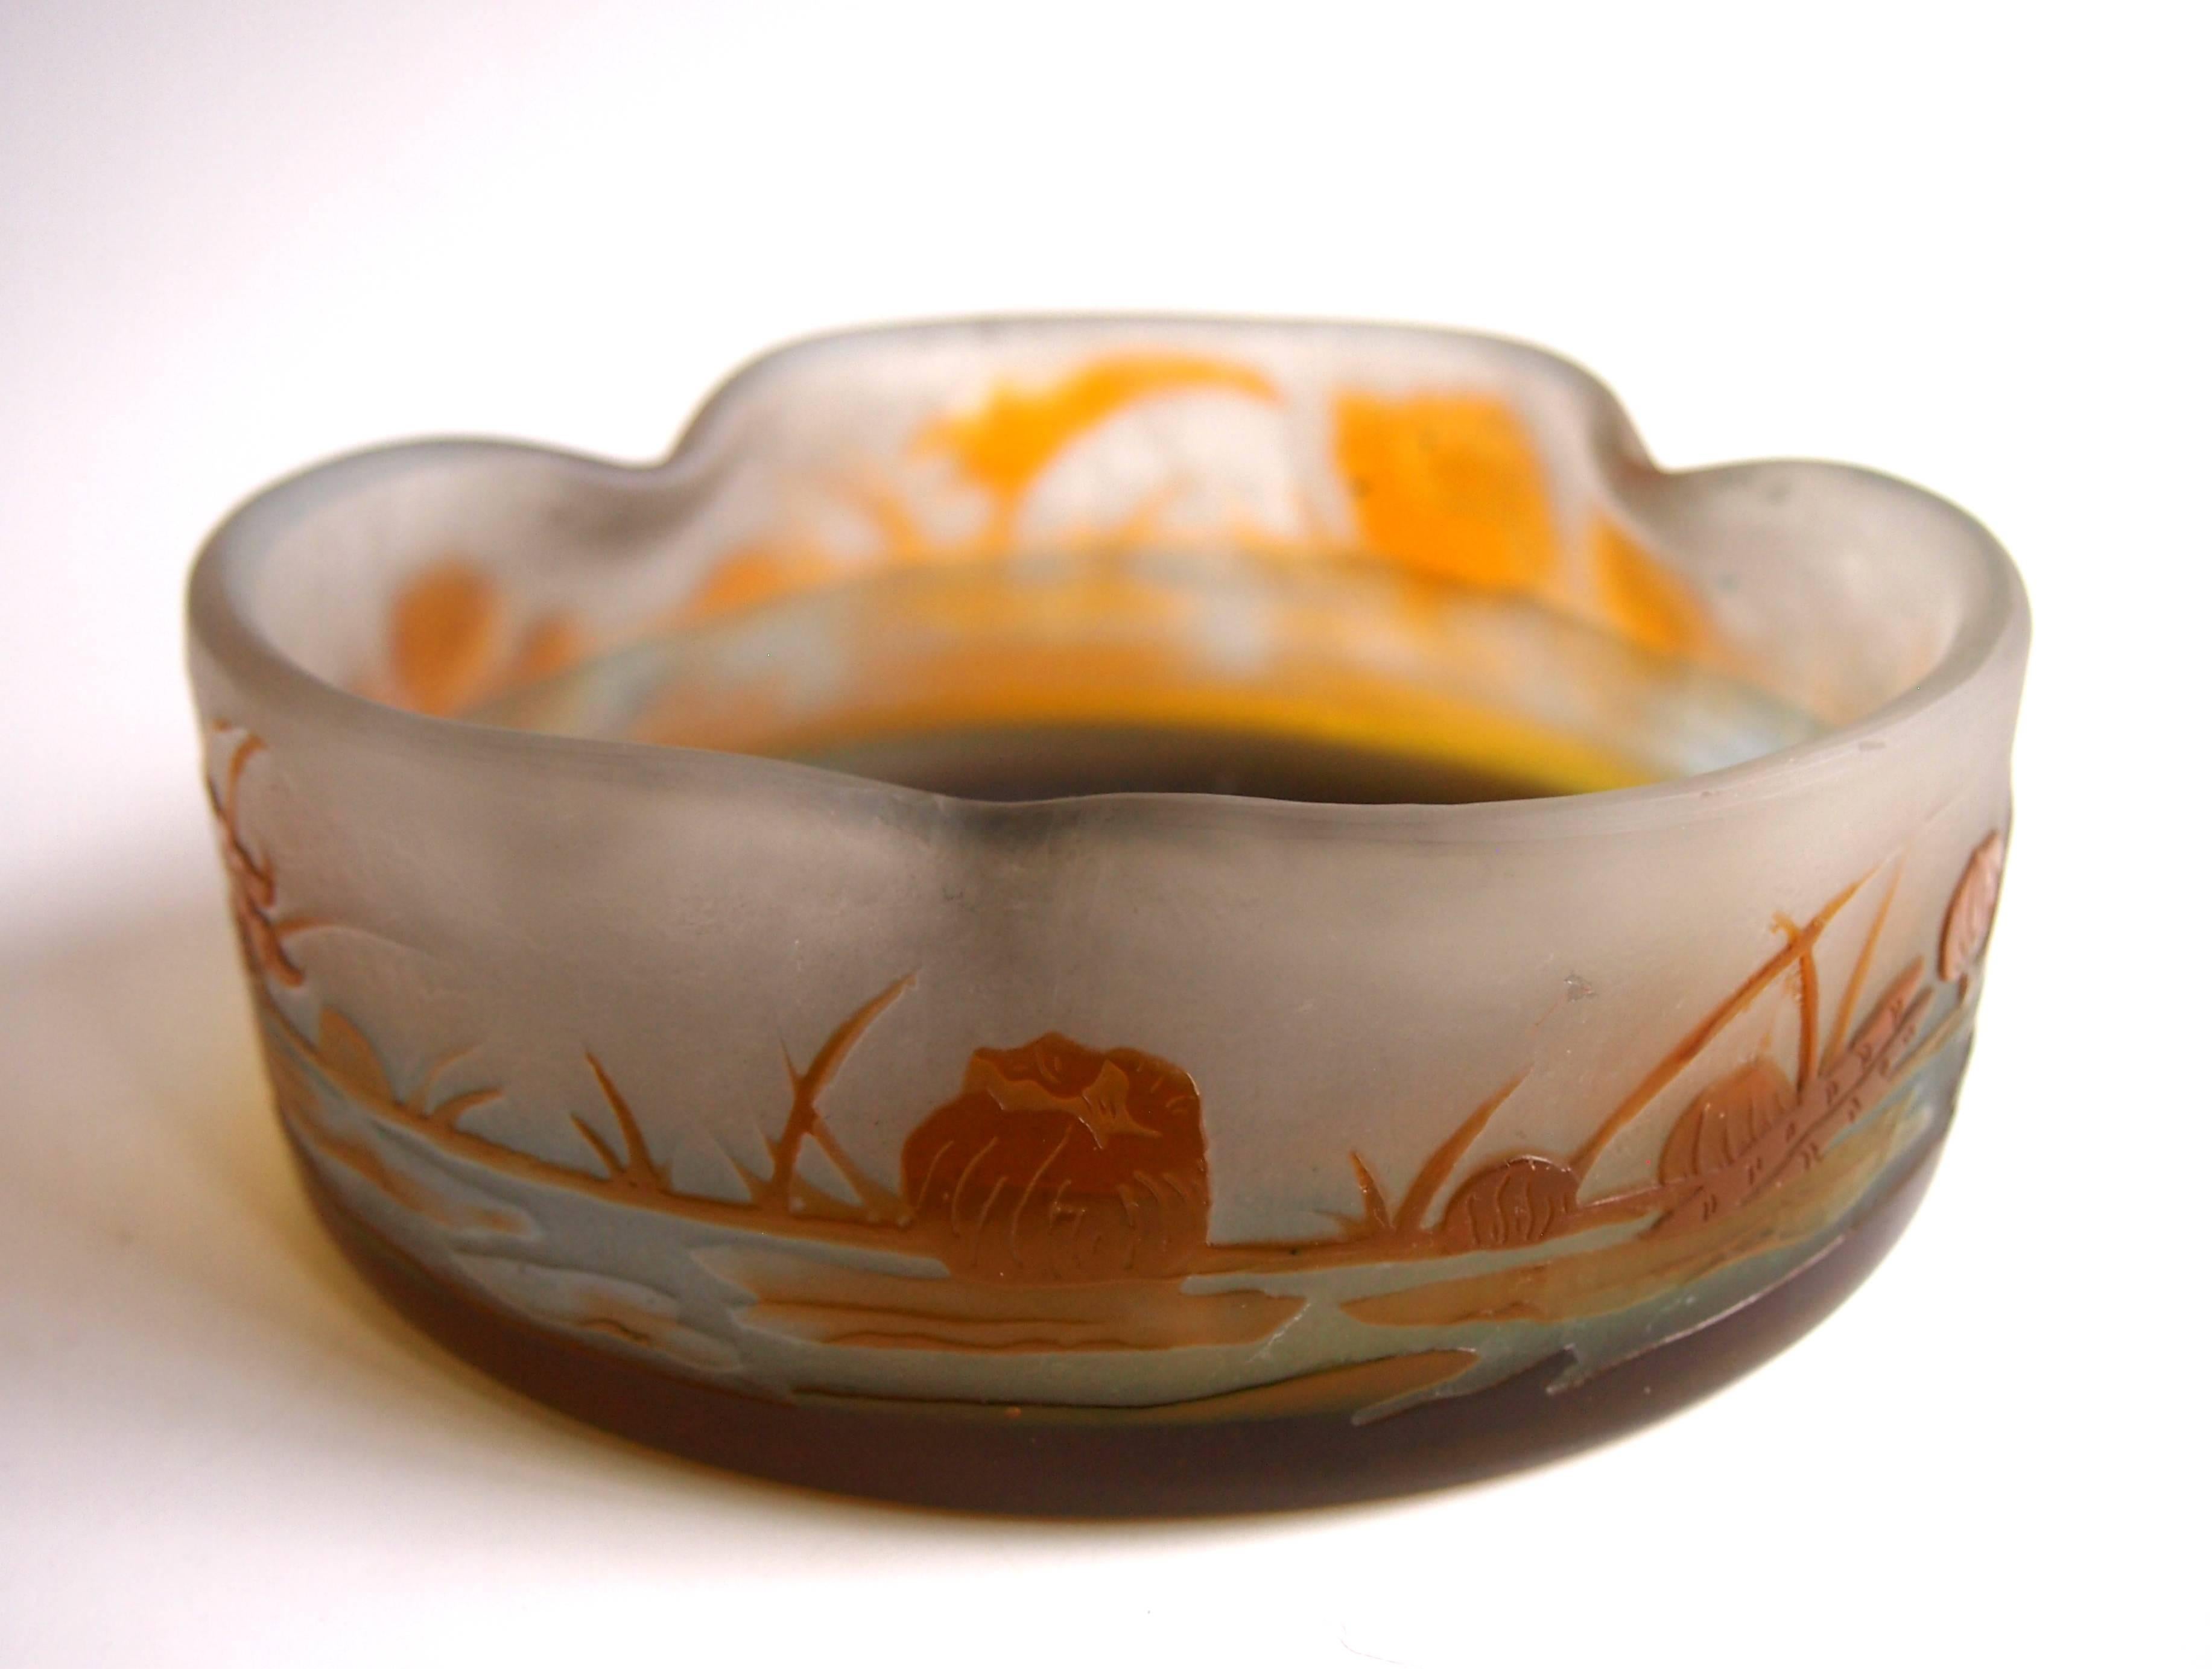 French Art Nouveau Emile Galle Cameo Glass Aquatic Bowl c1900 In Good Condition For Sale In London, GB